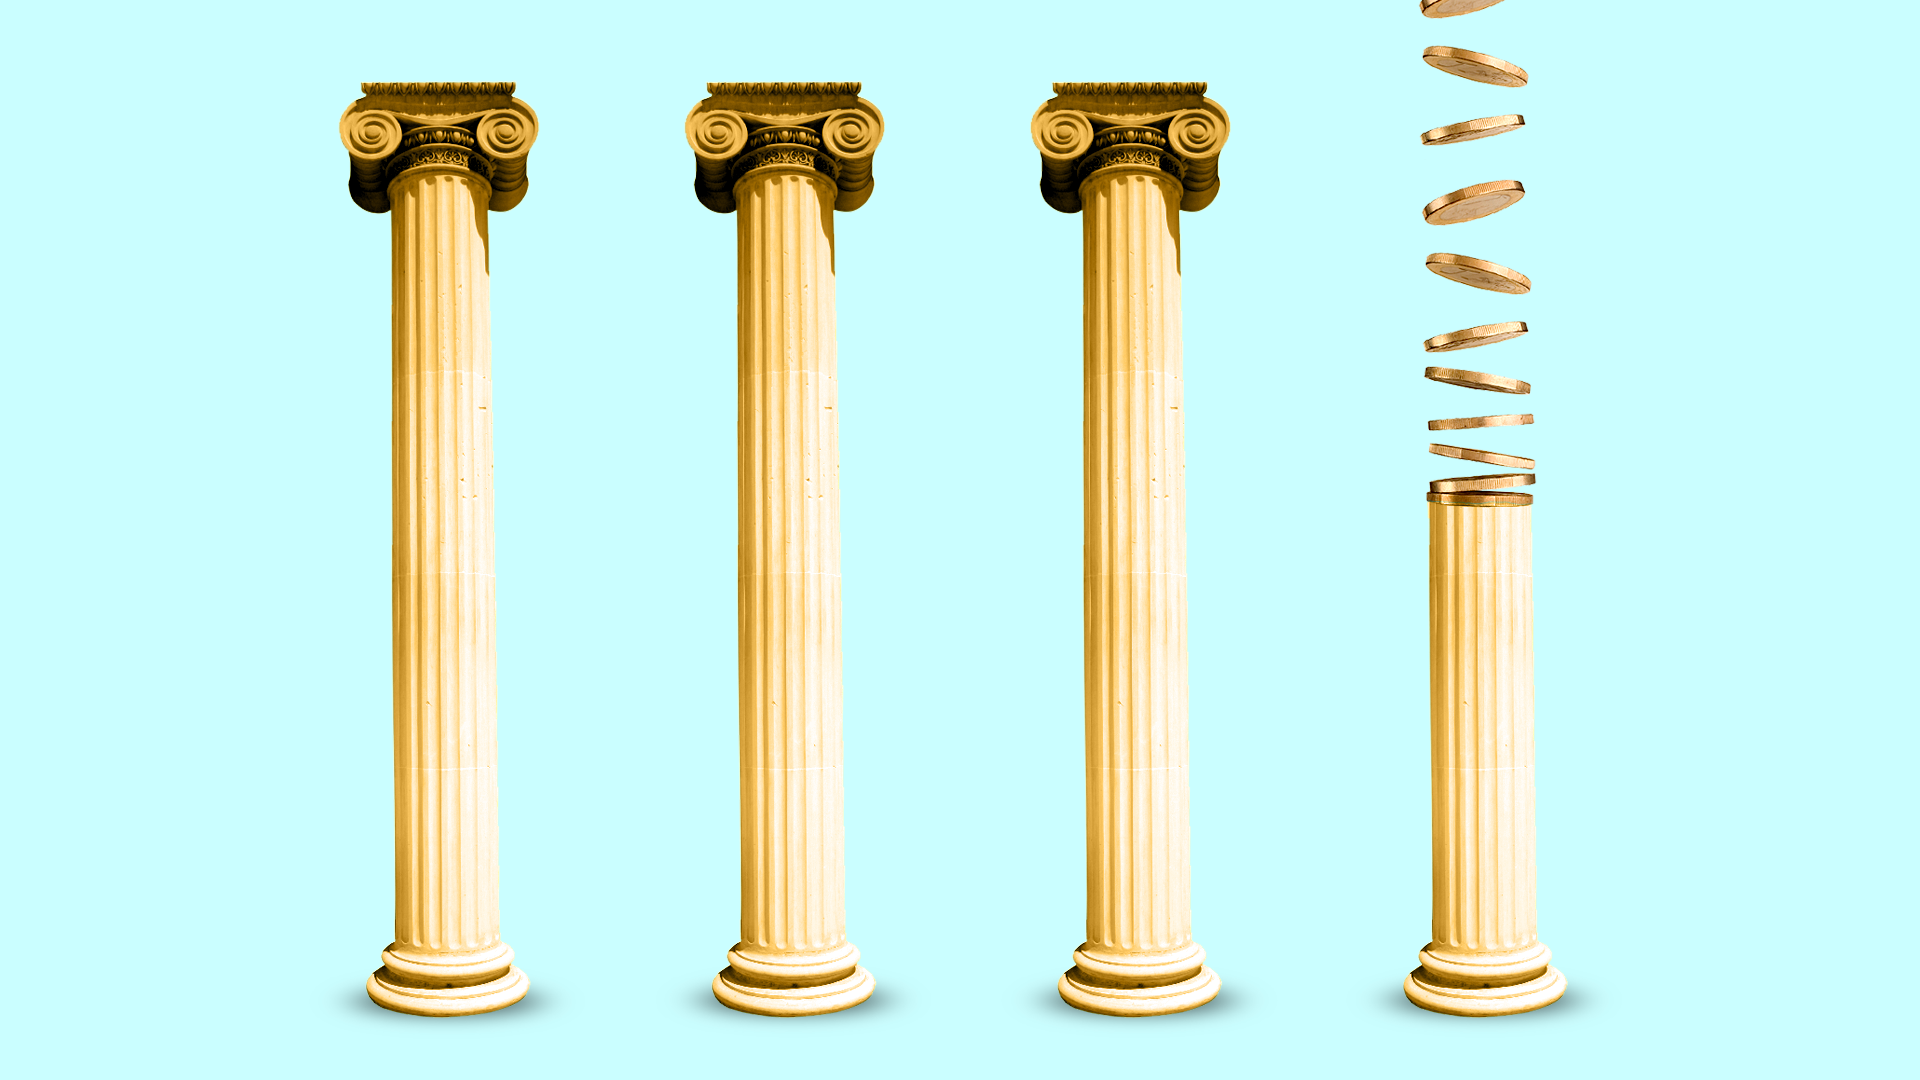 illustration of Greek pillars and the far right piillar is made of coins